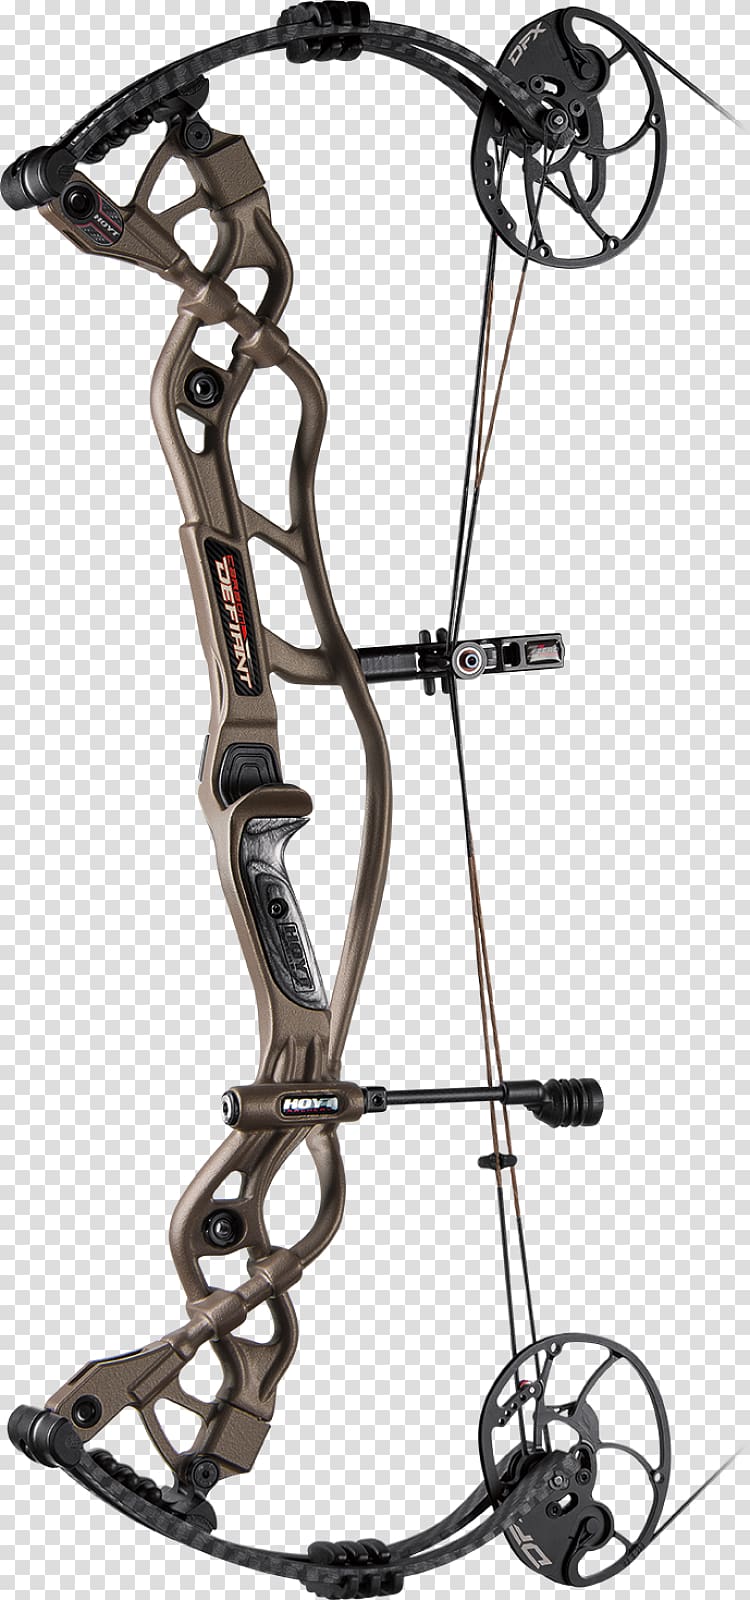 Compounds of carbon Hunting Compound Bows Bow and arrow, women shirt transparent background PNG clipart